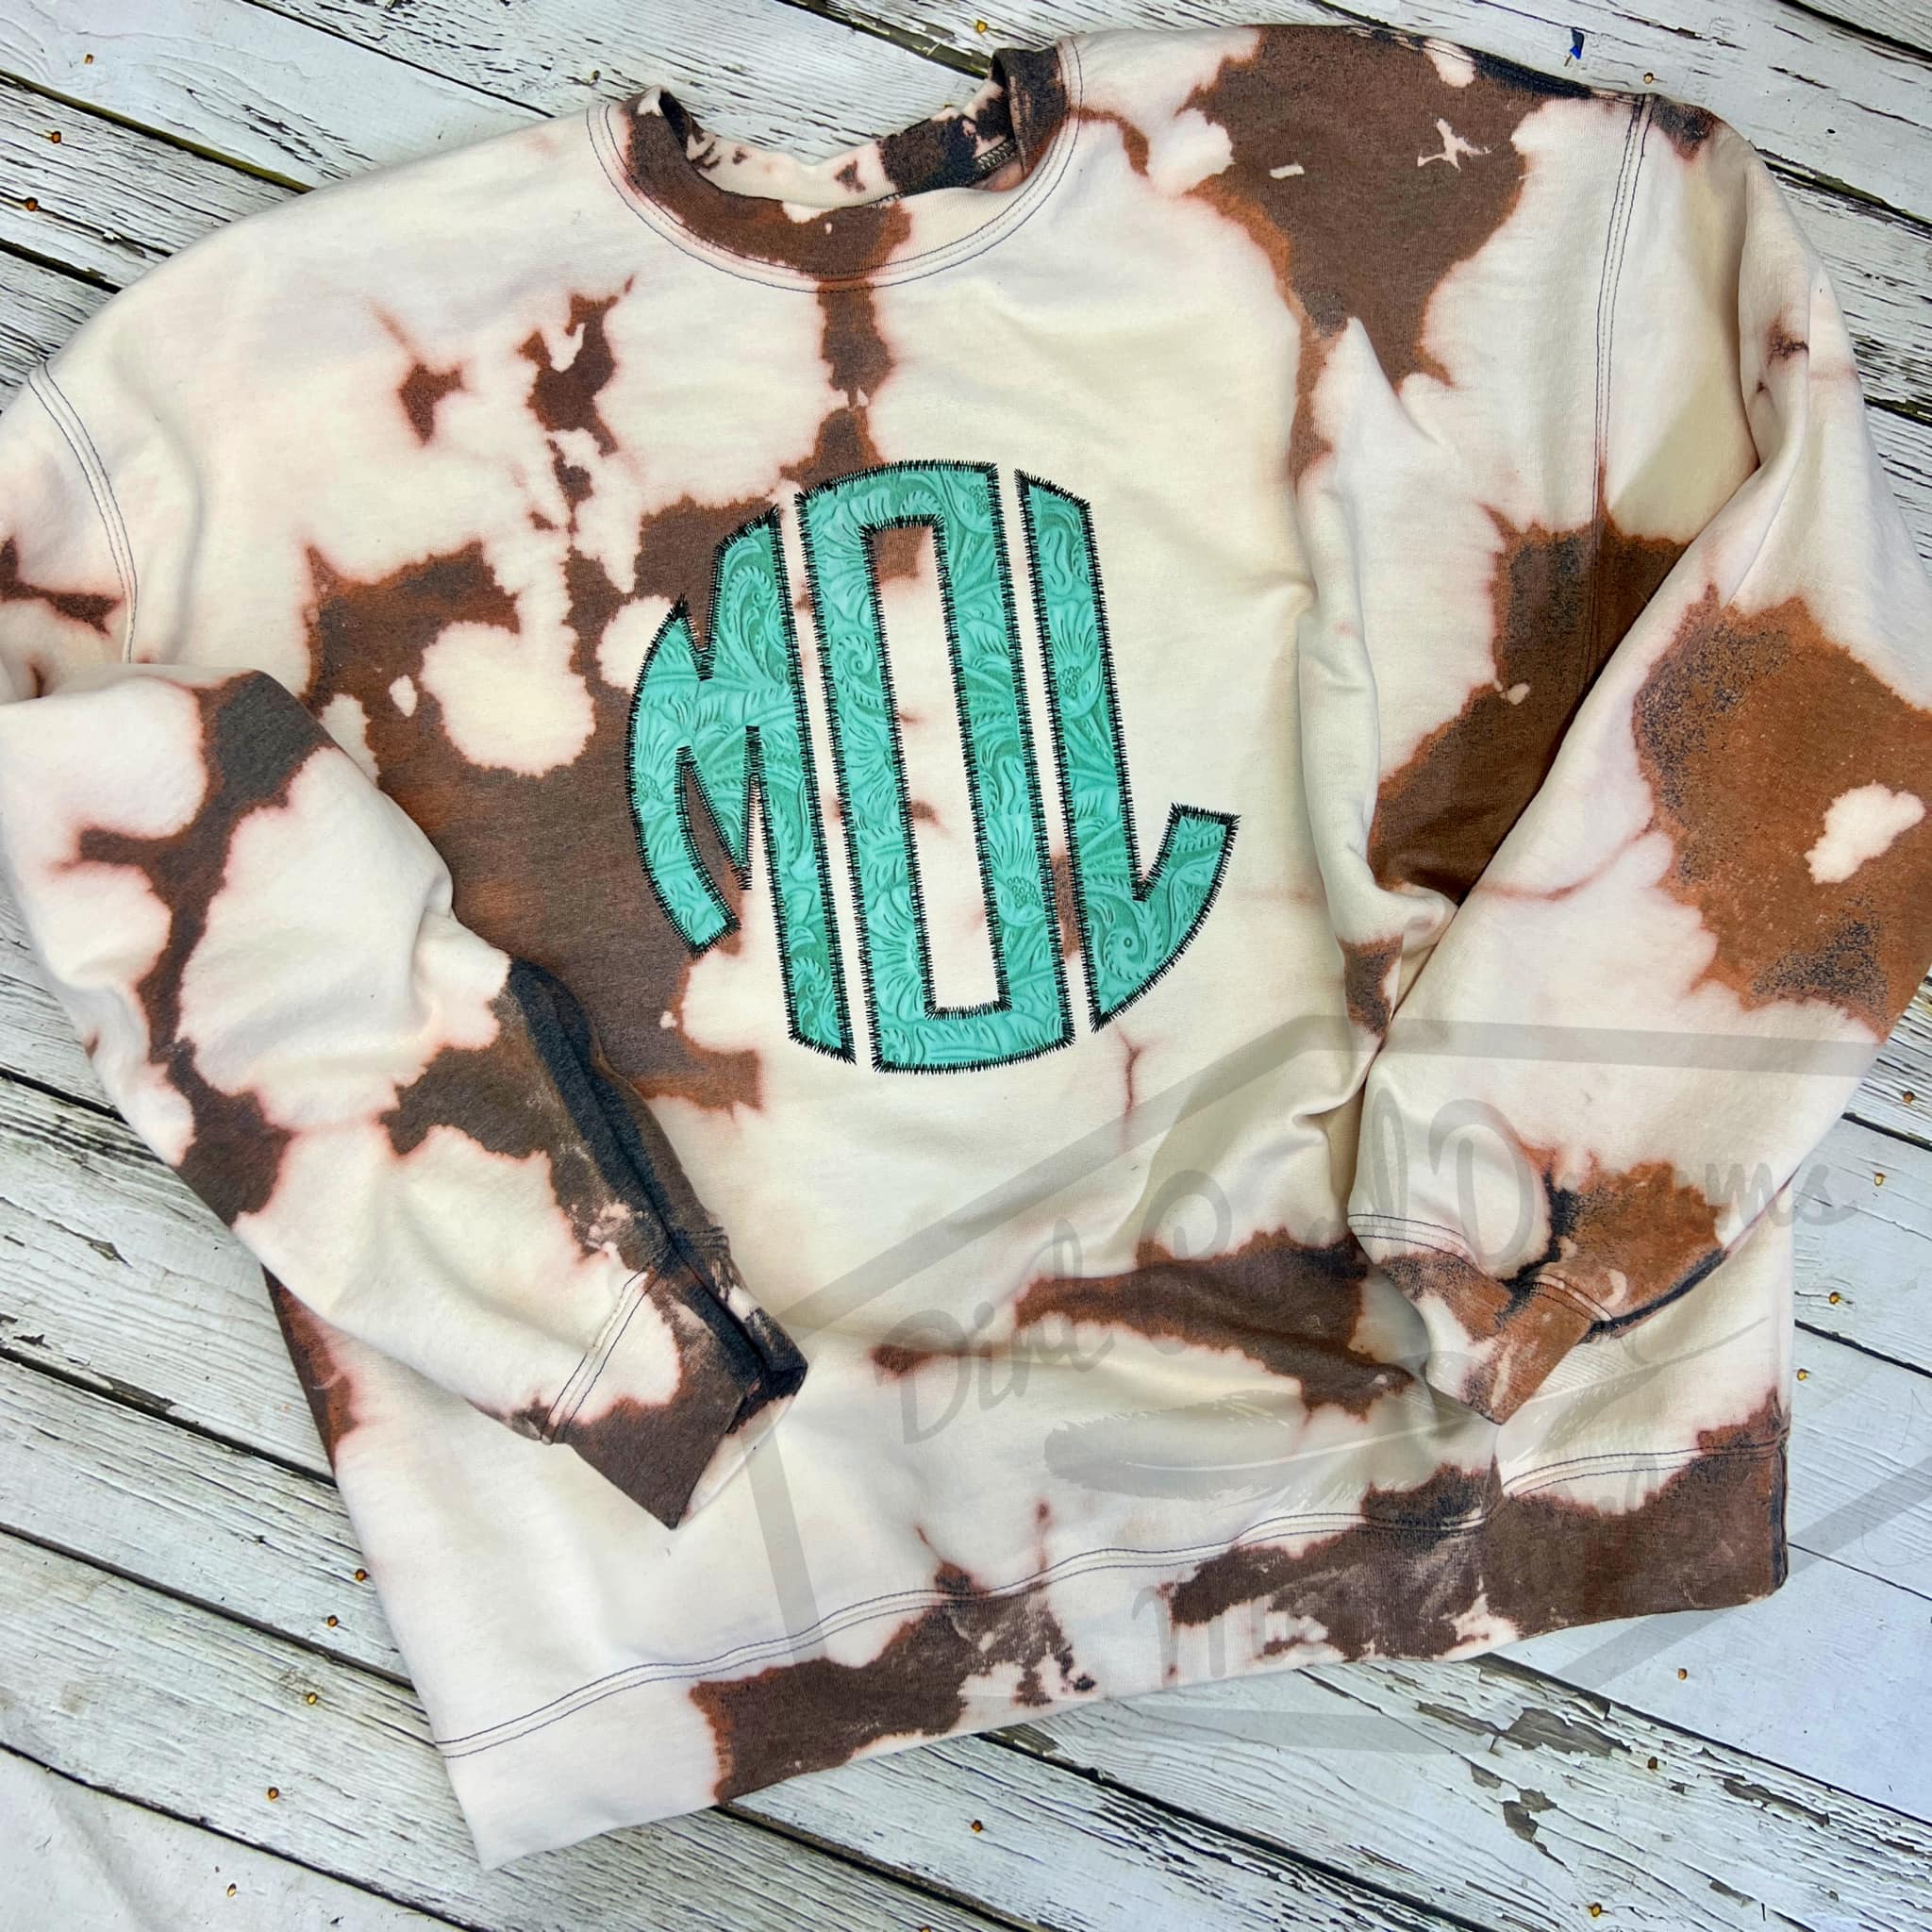 Cowhide Bleached Crewneck Sweatshirt with Turquoise Tooled Leather Fabric  Applique Monogram